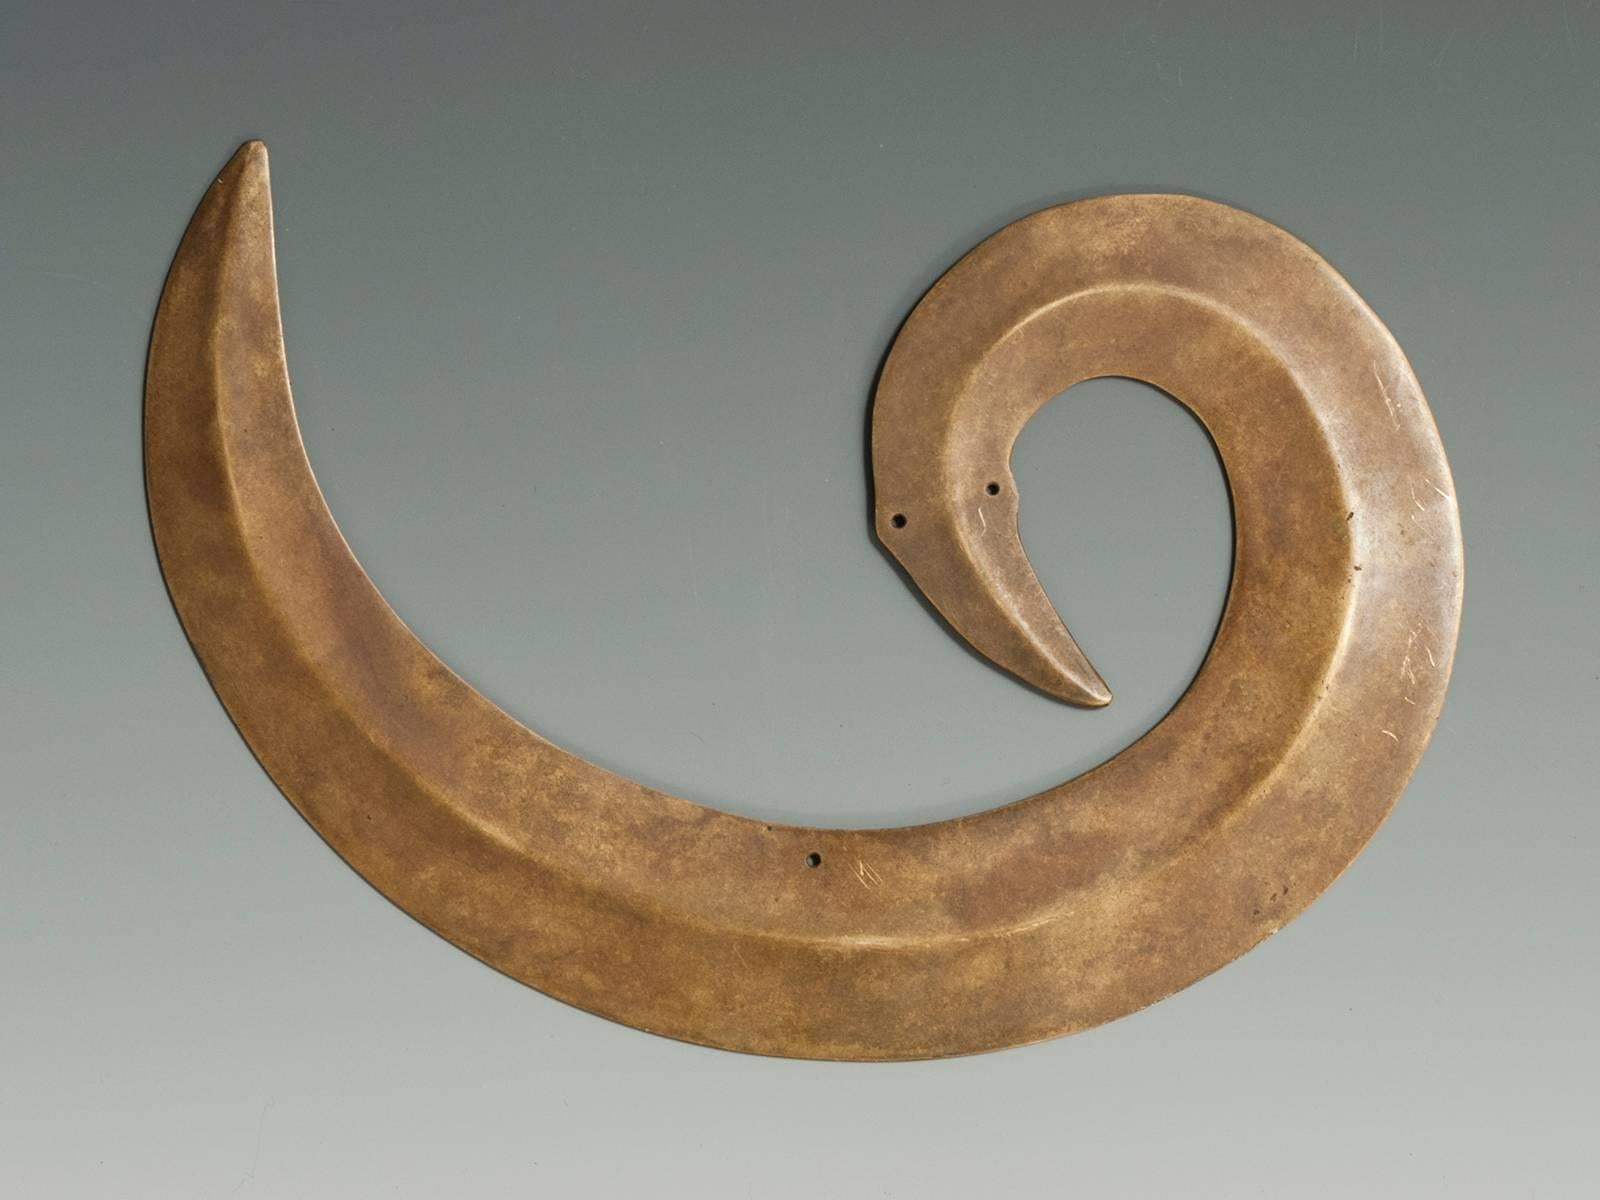 Offered by Zena Kruzick
Early 20th century tribal sanggori brass or copper alloy head ornament, Toraja people, Sulawesi, Indonesia.

These sinuous brass and copper alloy head pieces were worn by men at special ceremonies. This sanggori is convex